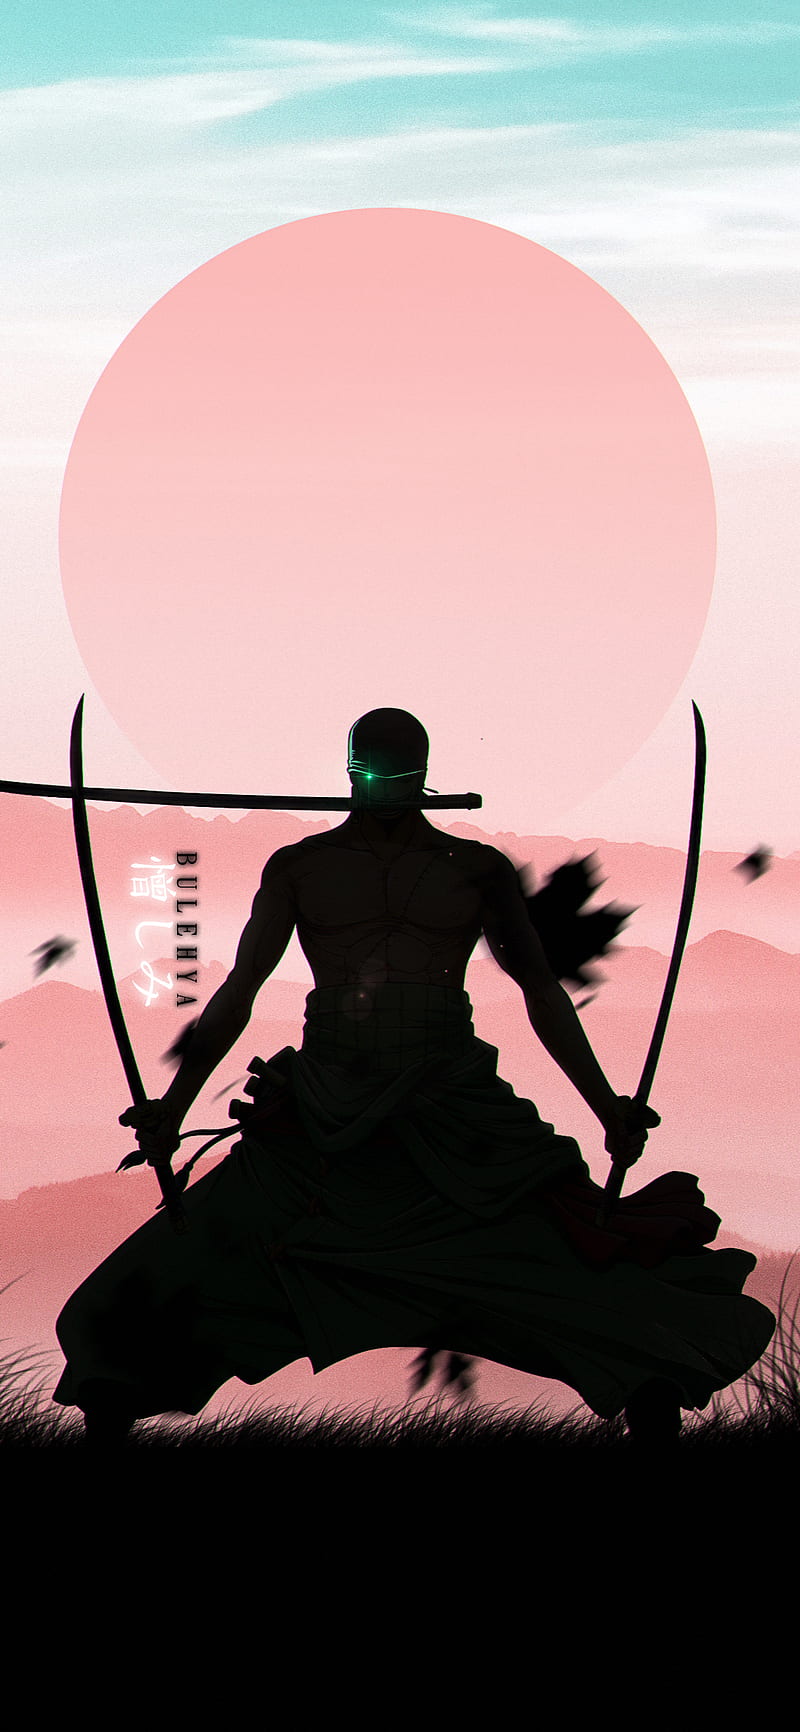 Roronoa Zoro wallpaper by lucifer2340v  Download on ZEDGE  be35